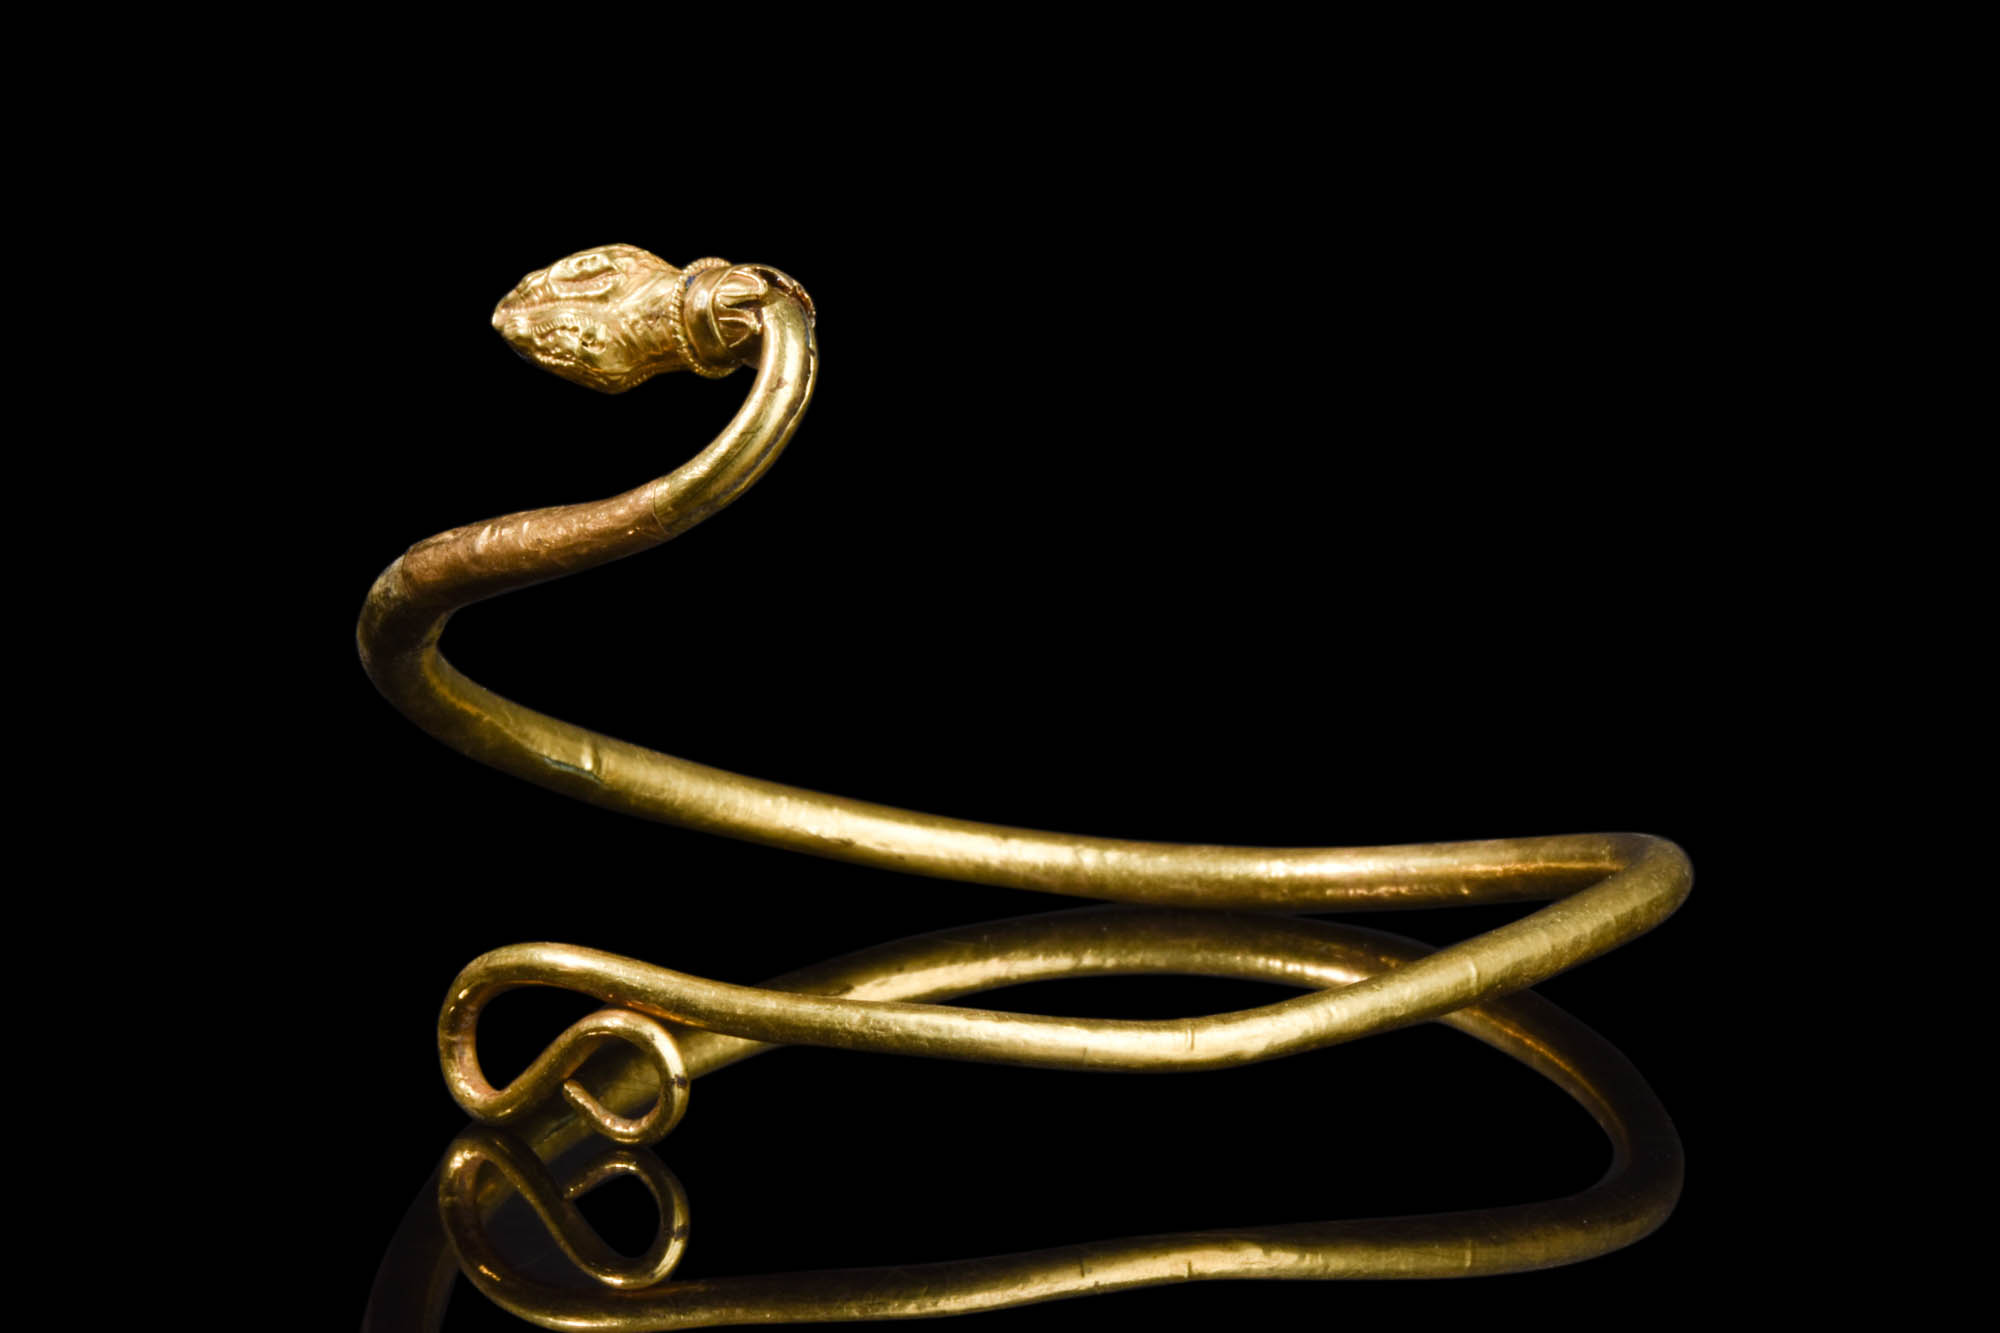 HEAVY PTOLEMAIC GOLD ARM RING